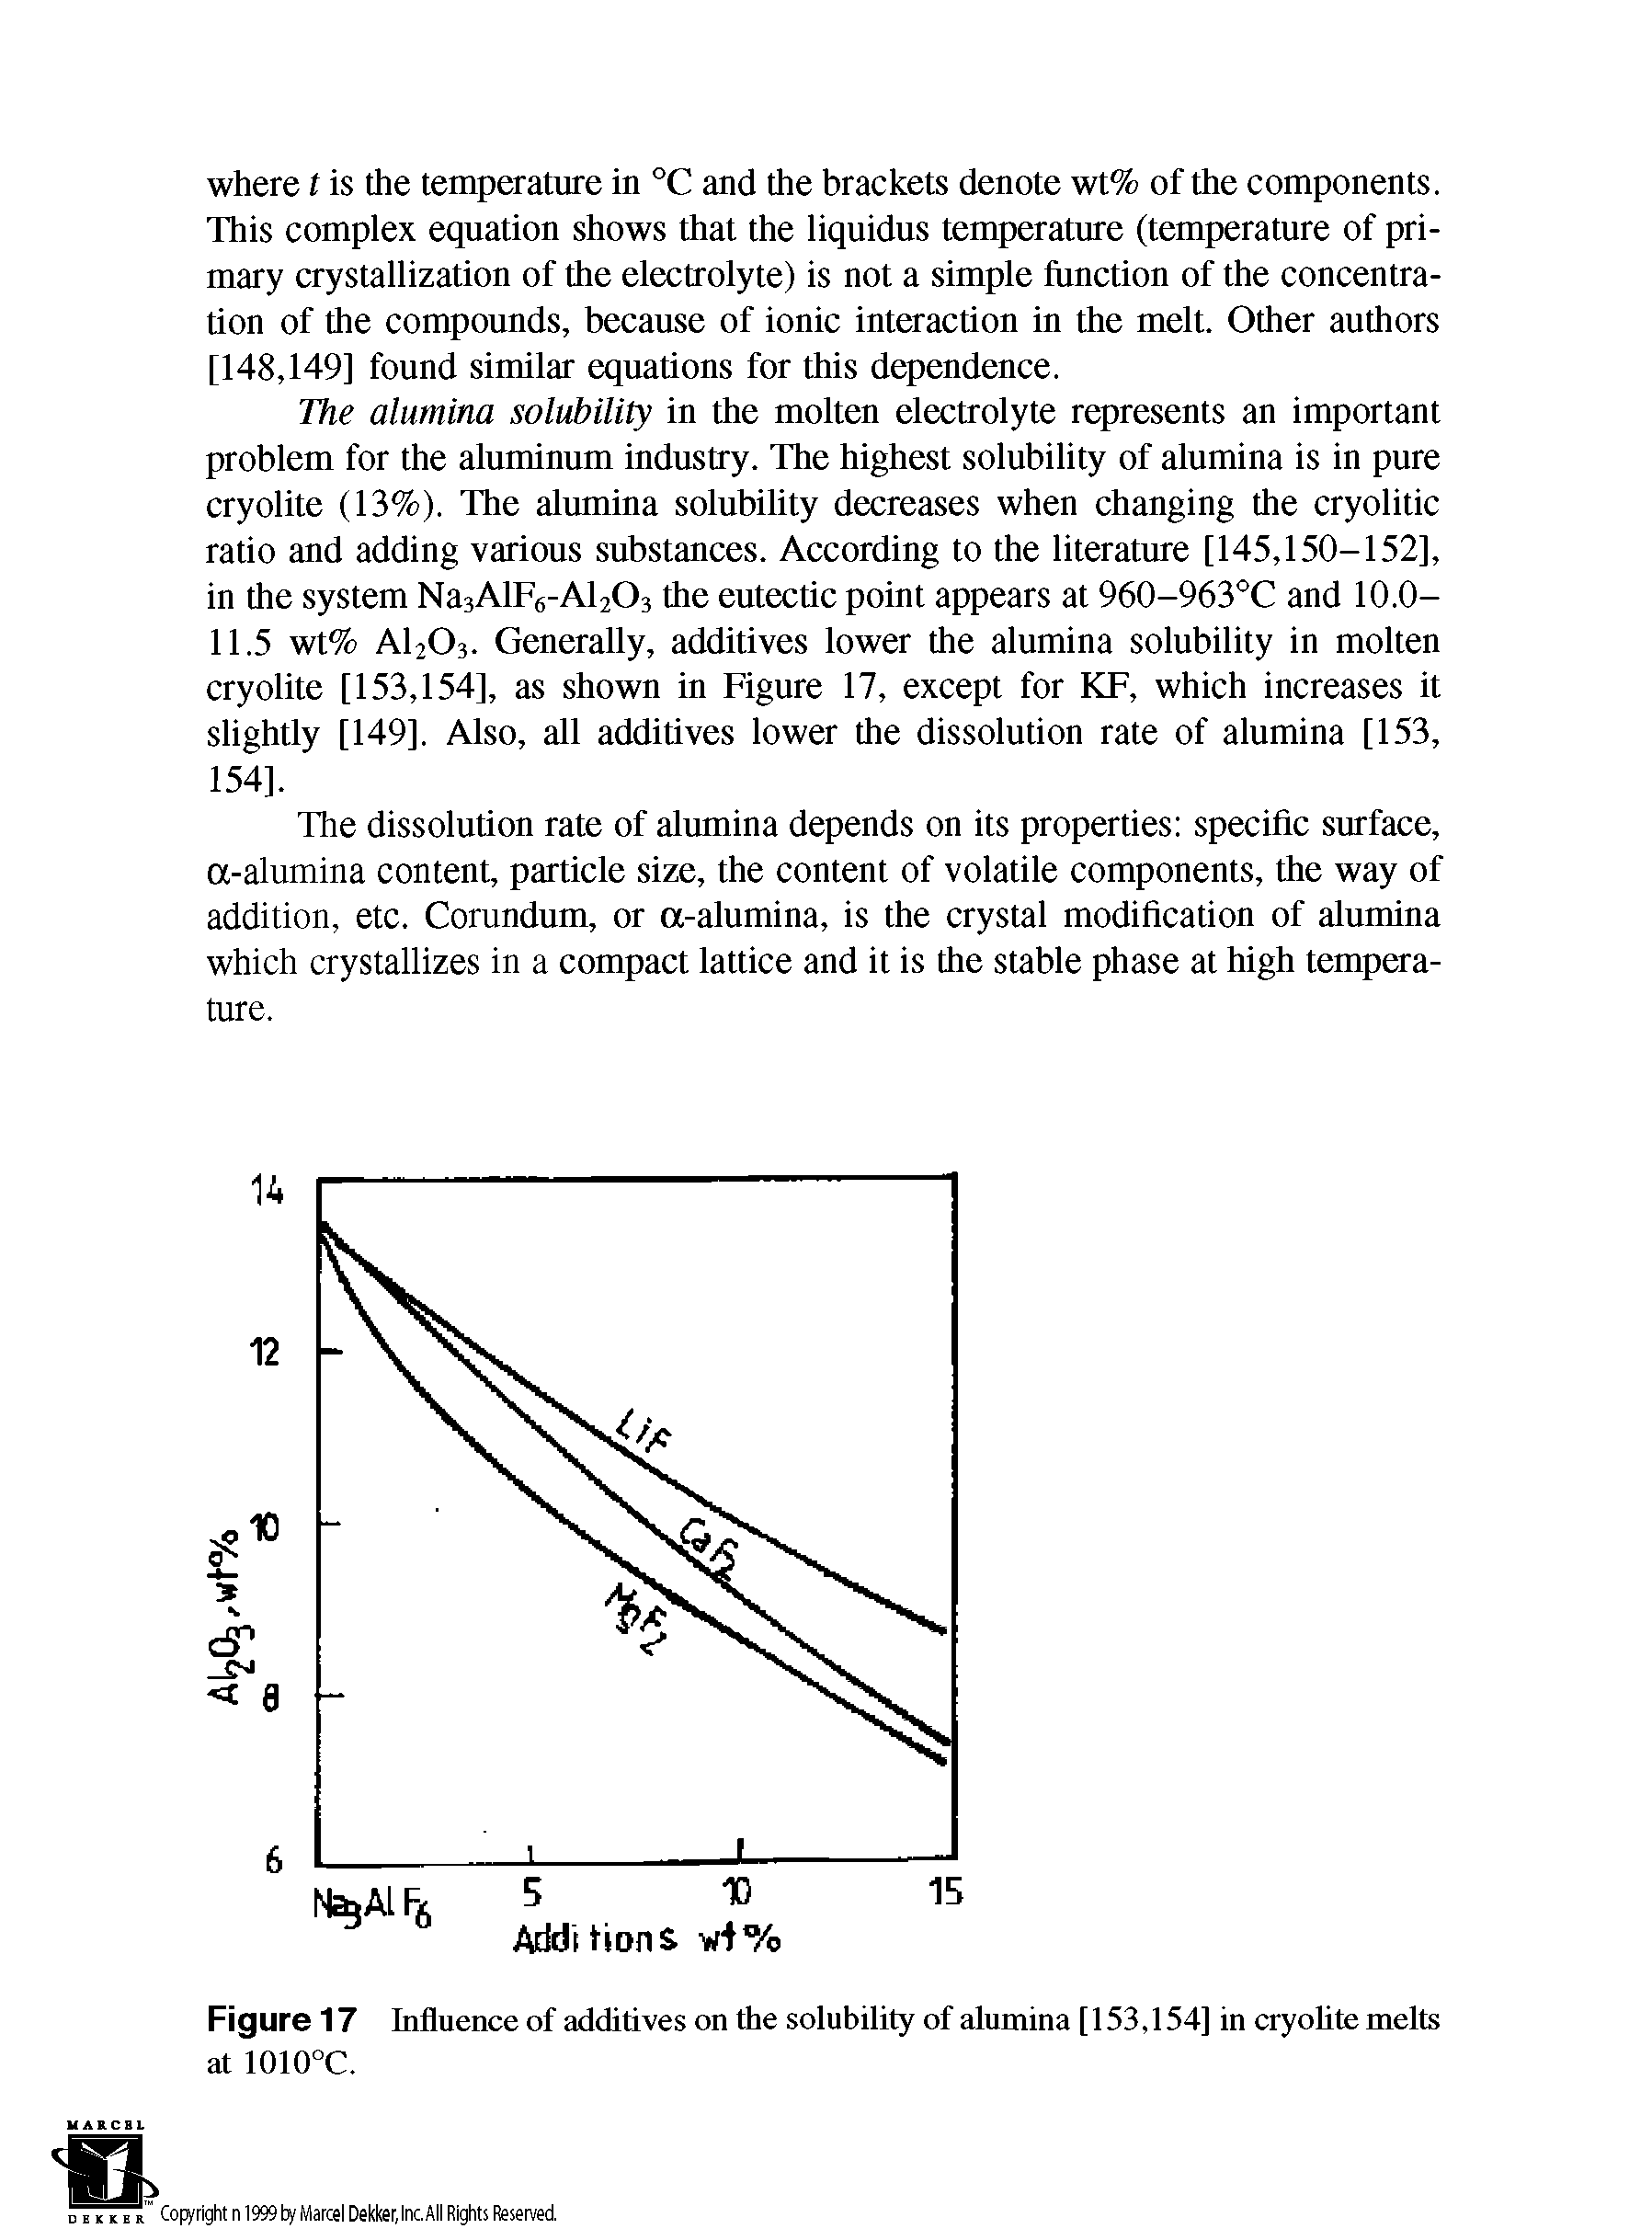 Figure 17 Influence of additives on the solubility of alumina [153,154] in cryolite melts at 1010°C.